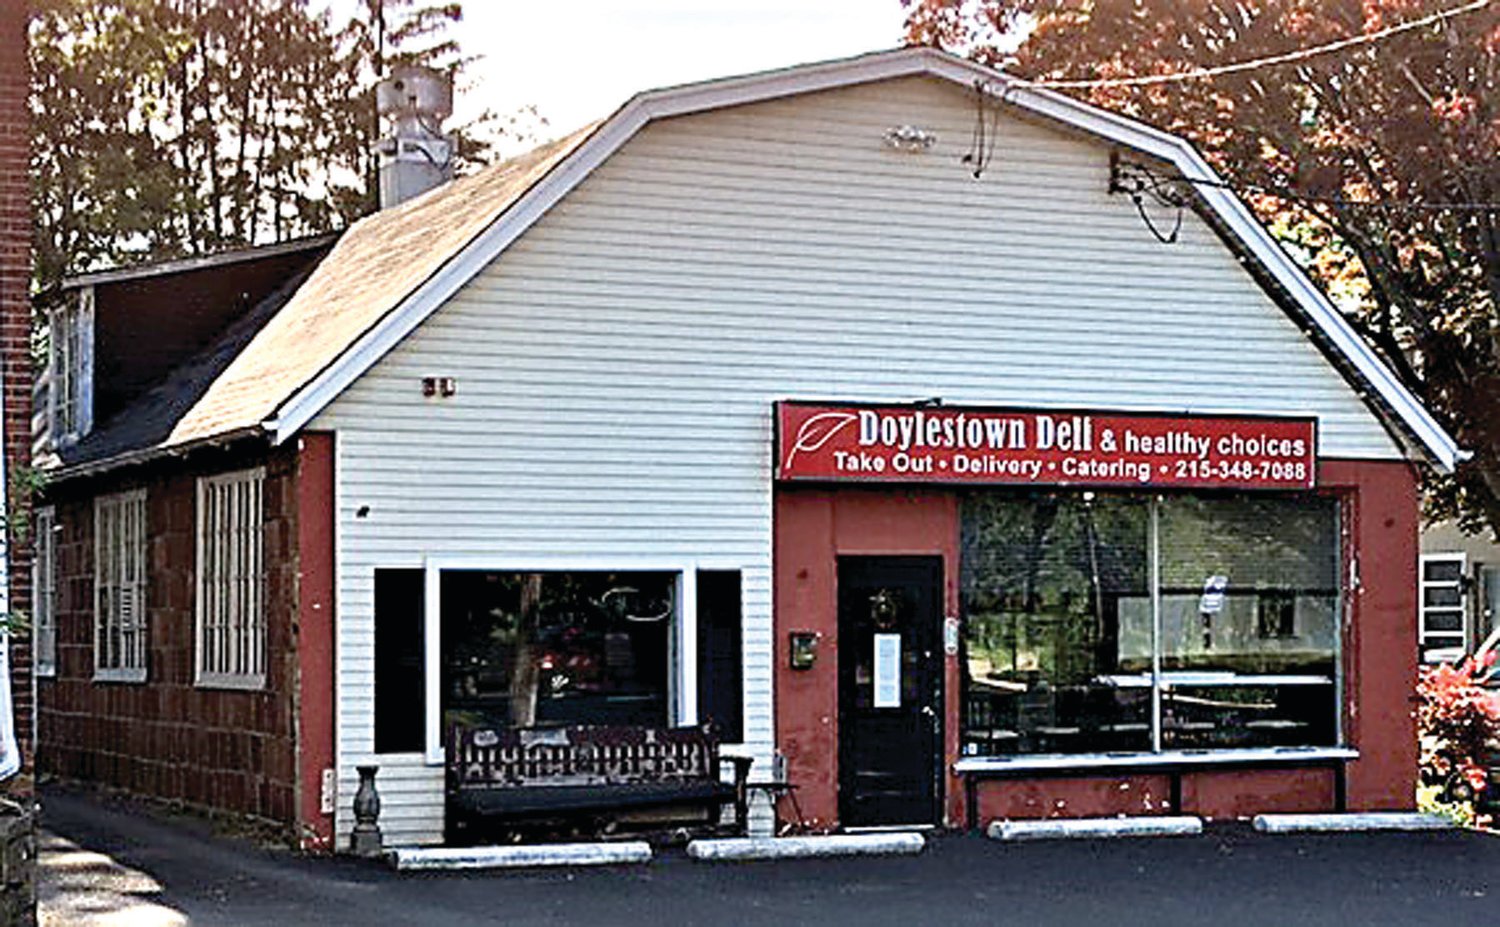 The most recent occupant of the former North Main Street Garage was Doylestown Deli & Healthy Choices.